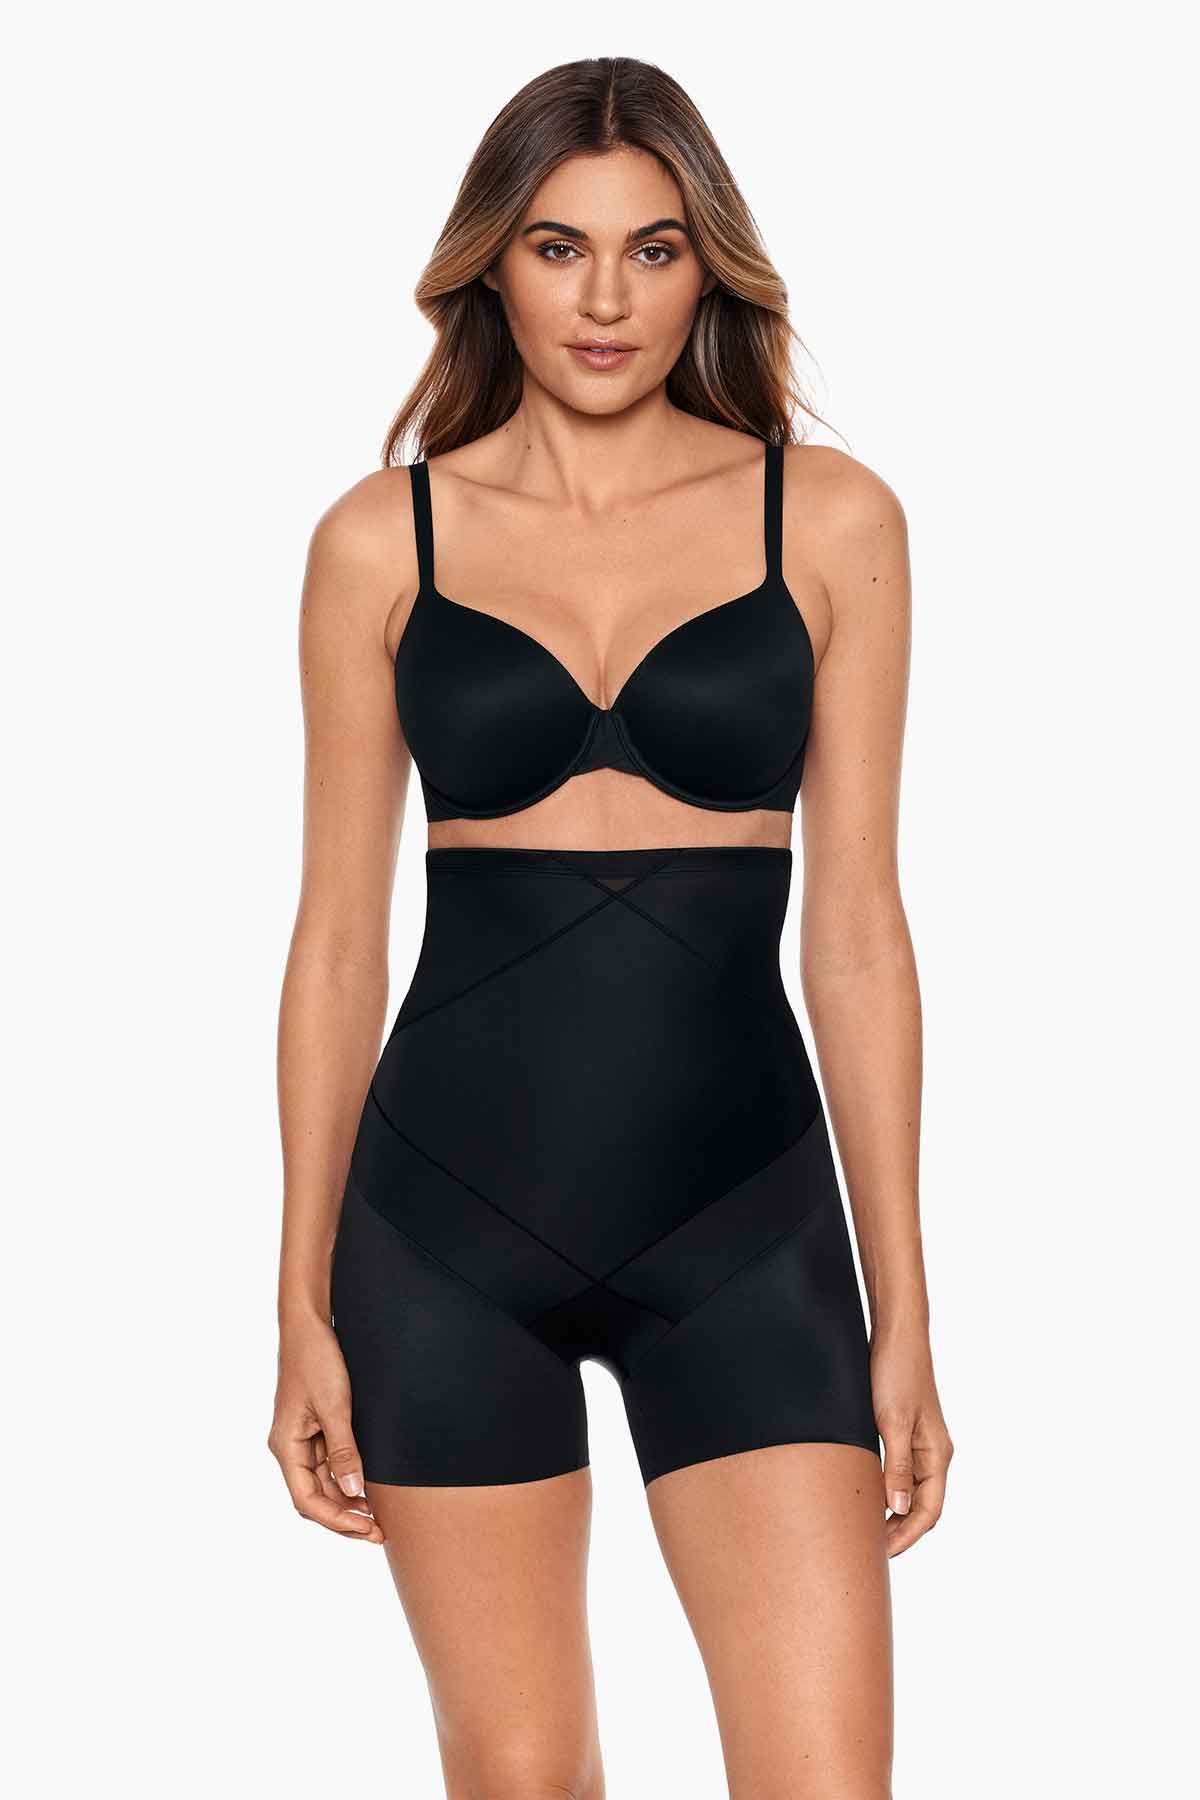 Buy Miraclesuit High Waisted Sheer Tummy Control Rear Lift